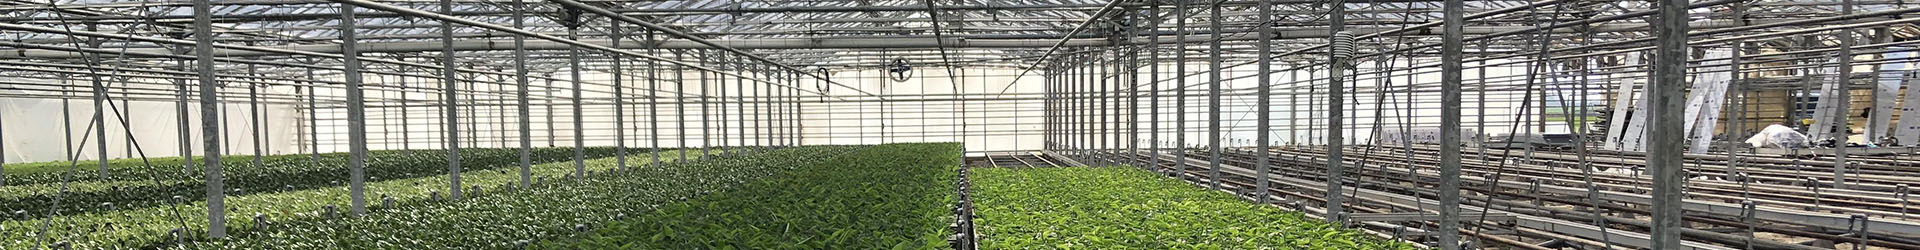 Polycarbonate Sheets for Greenhouse Roofing